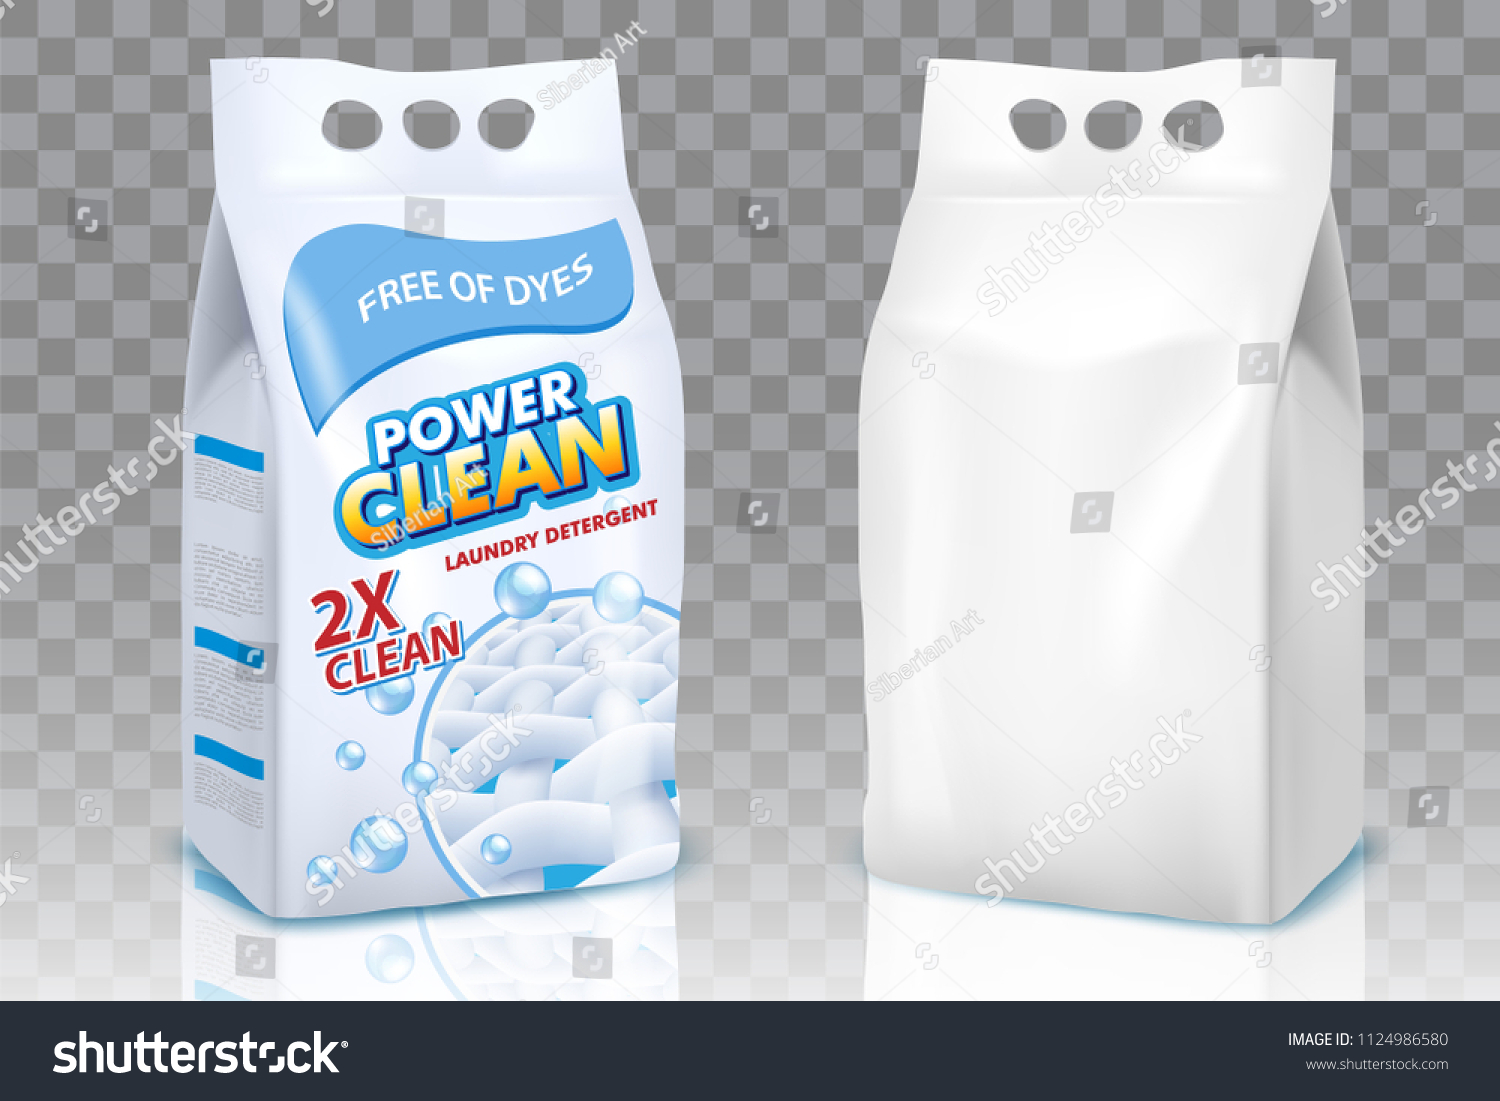 Powder Laundry Detergent Packaging Mockup Set Stock Vector Royalty Free 1124986580